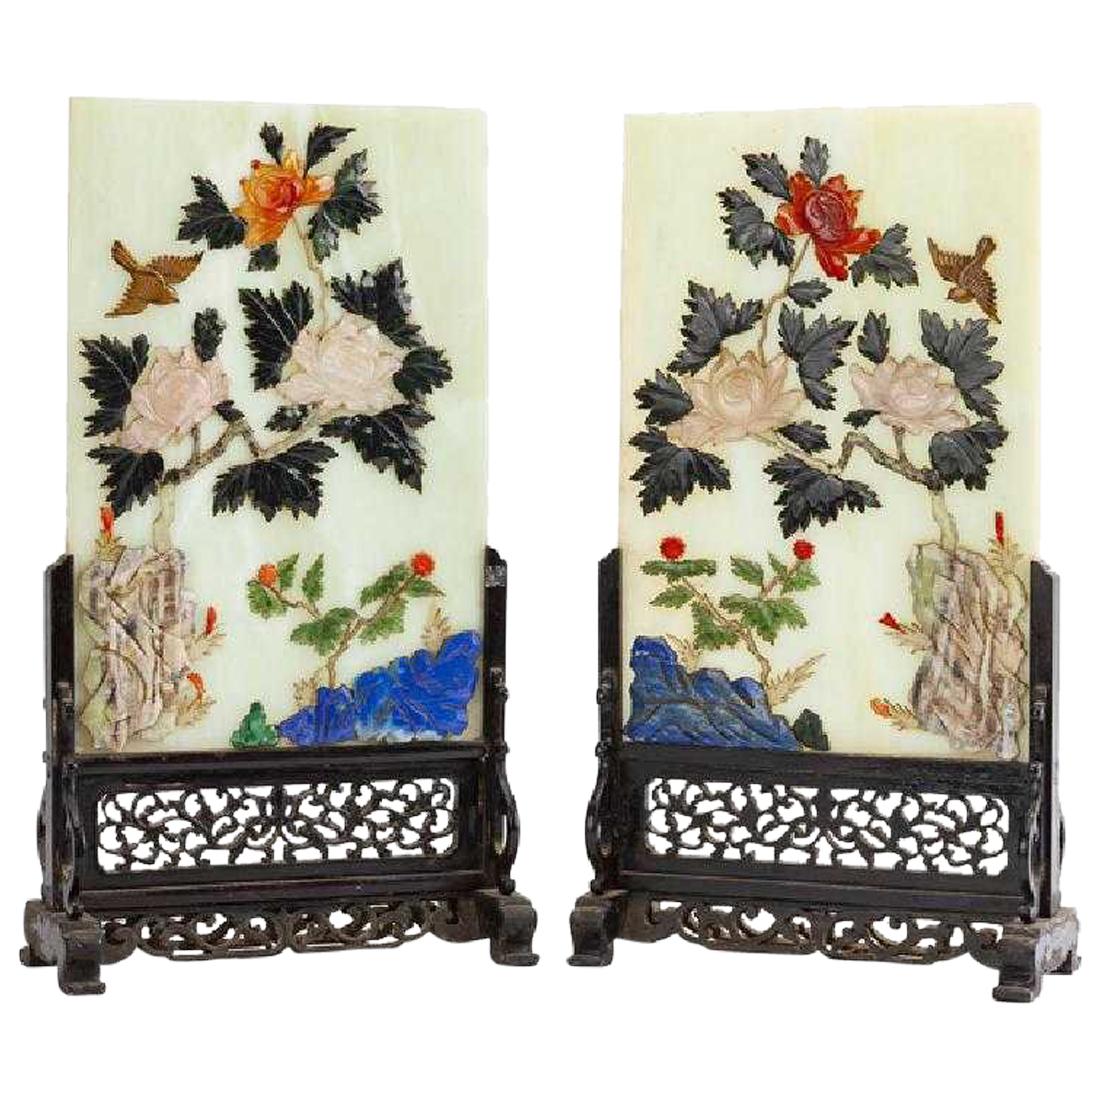 Antique Pair of Chinese Carved Gemstone Table Screens on Wooden Bases